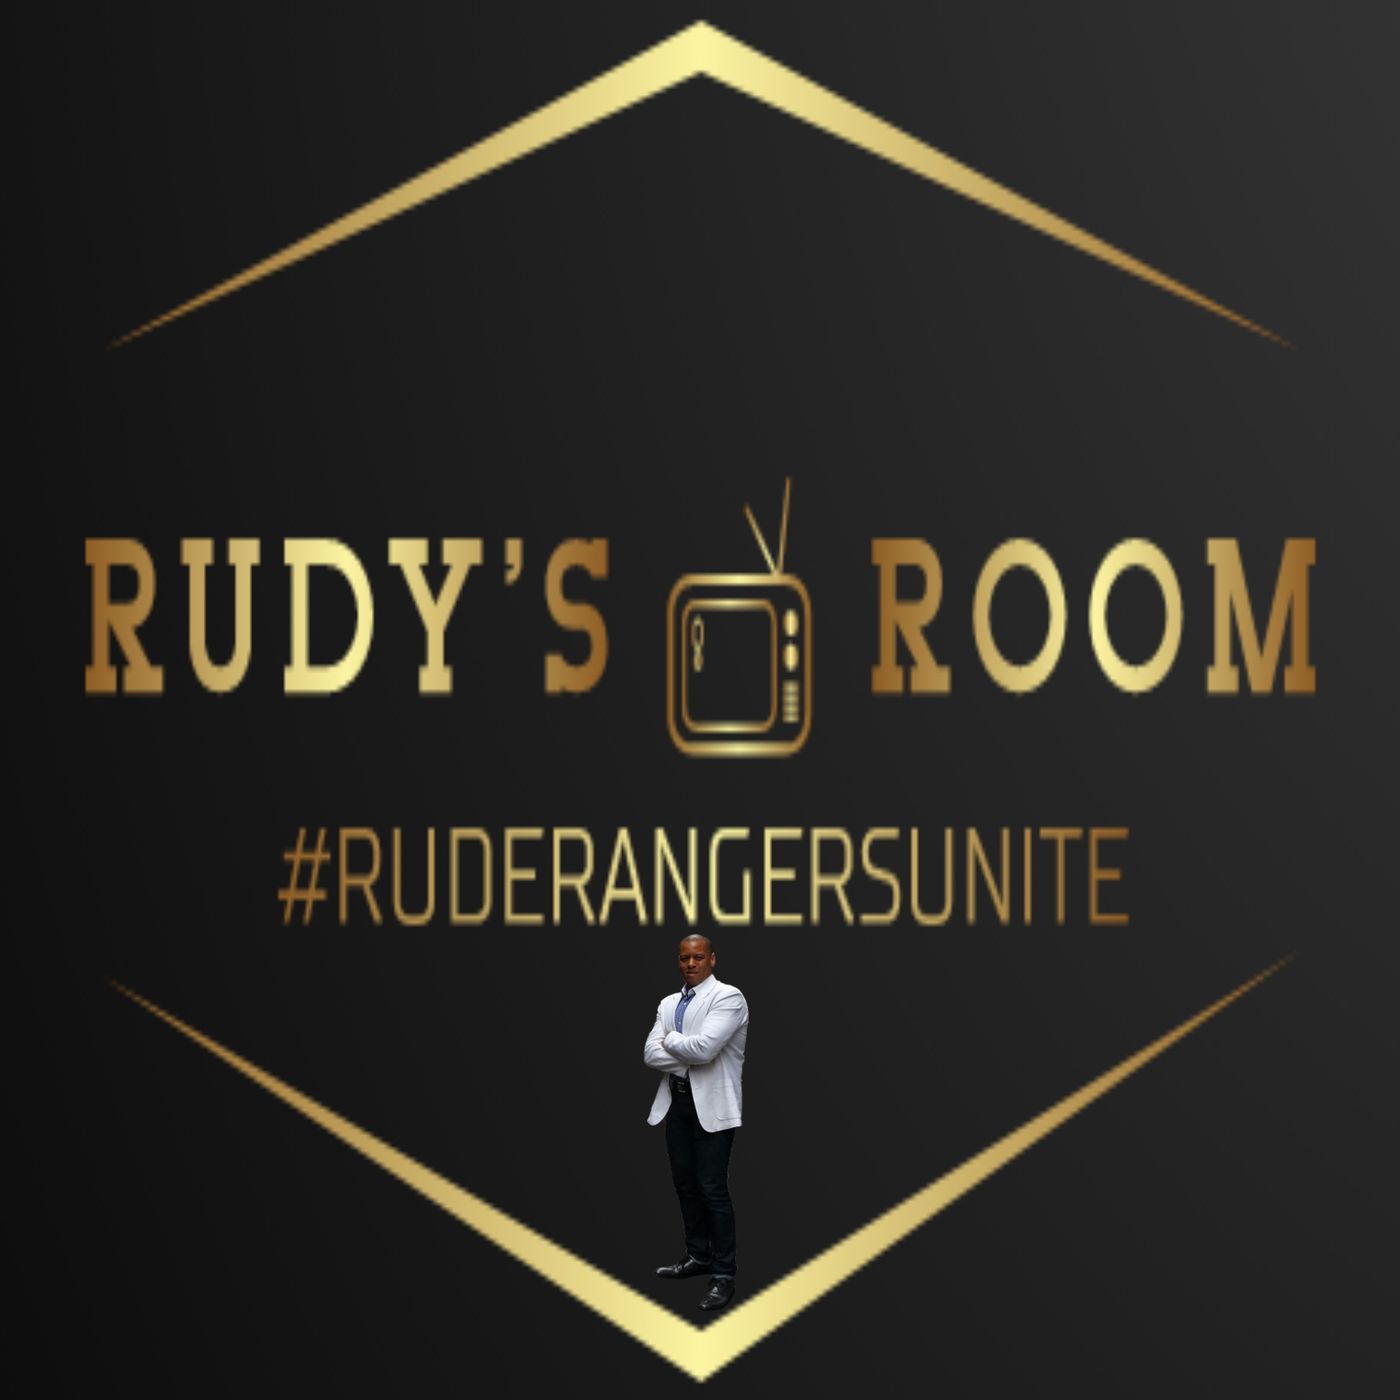 My Frenemy In Fort Collins - Advice From Rudy's Room